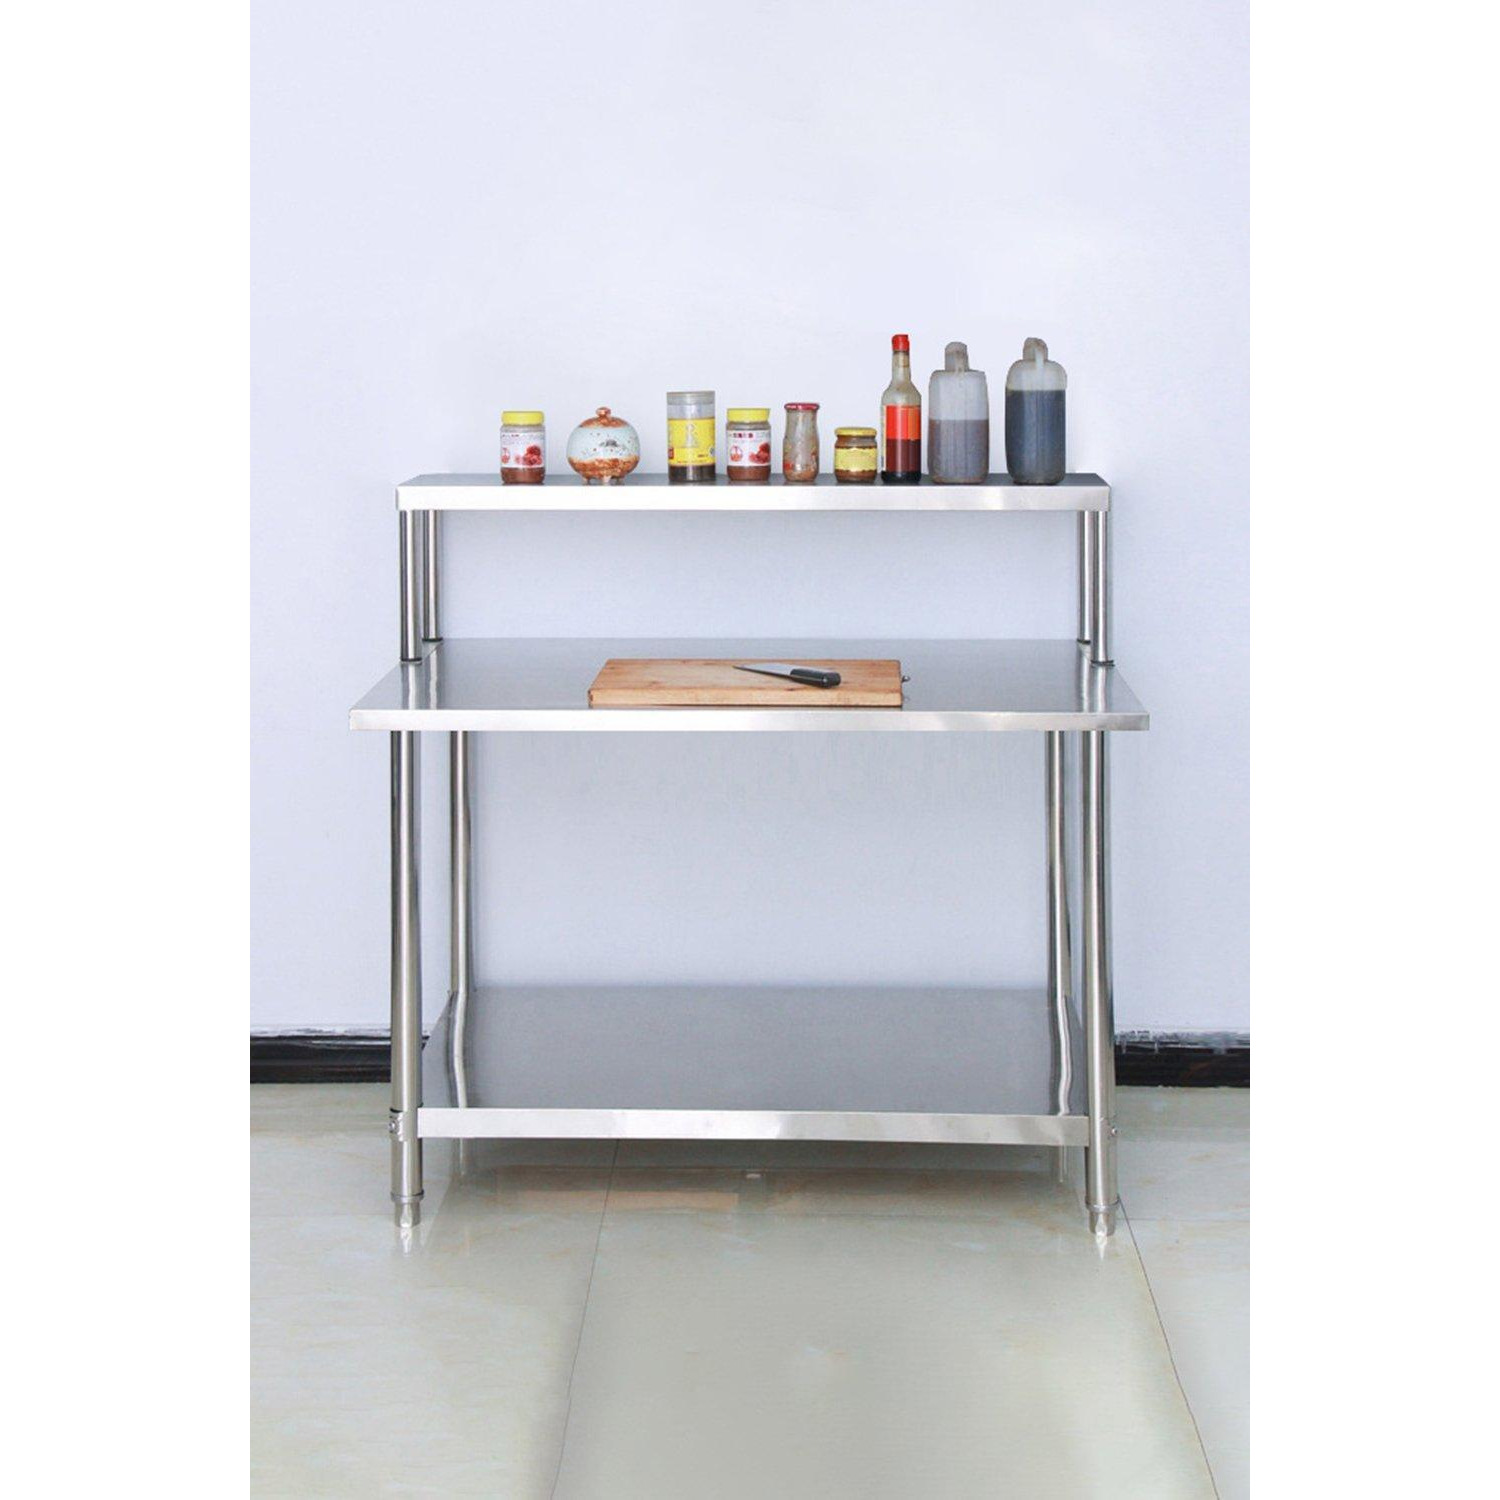 2 Pcs Stainless Steel Kitchen Prep Work Table with Overshelf Worktop Bench - image 1